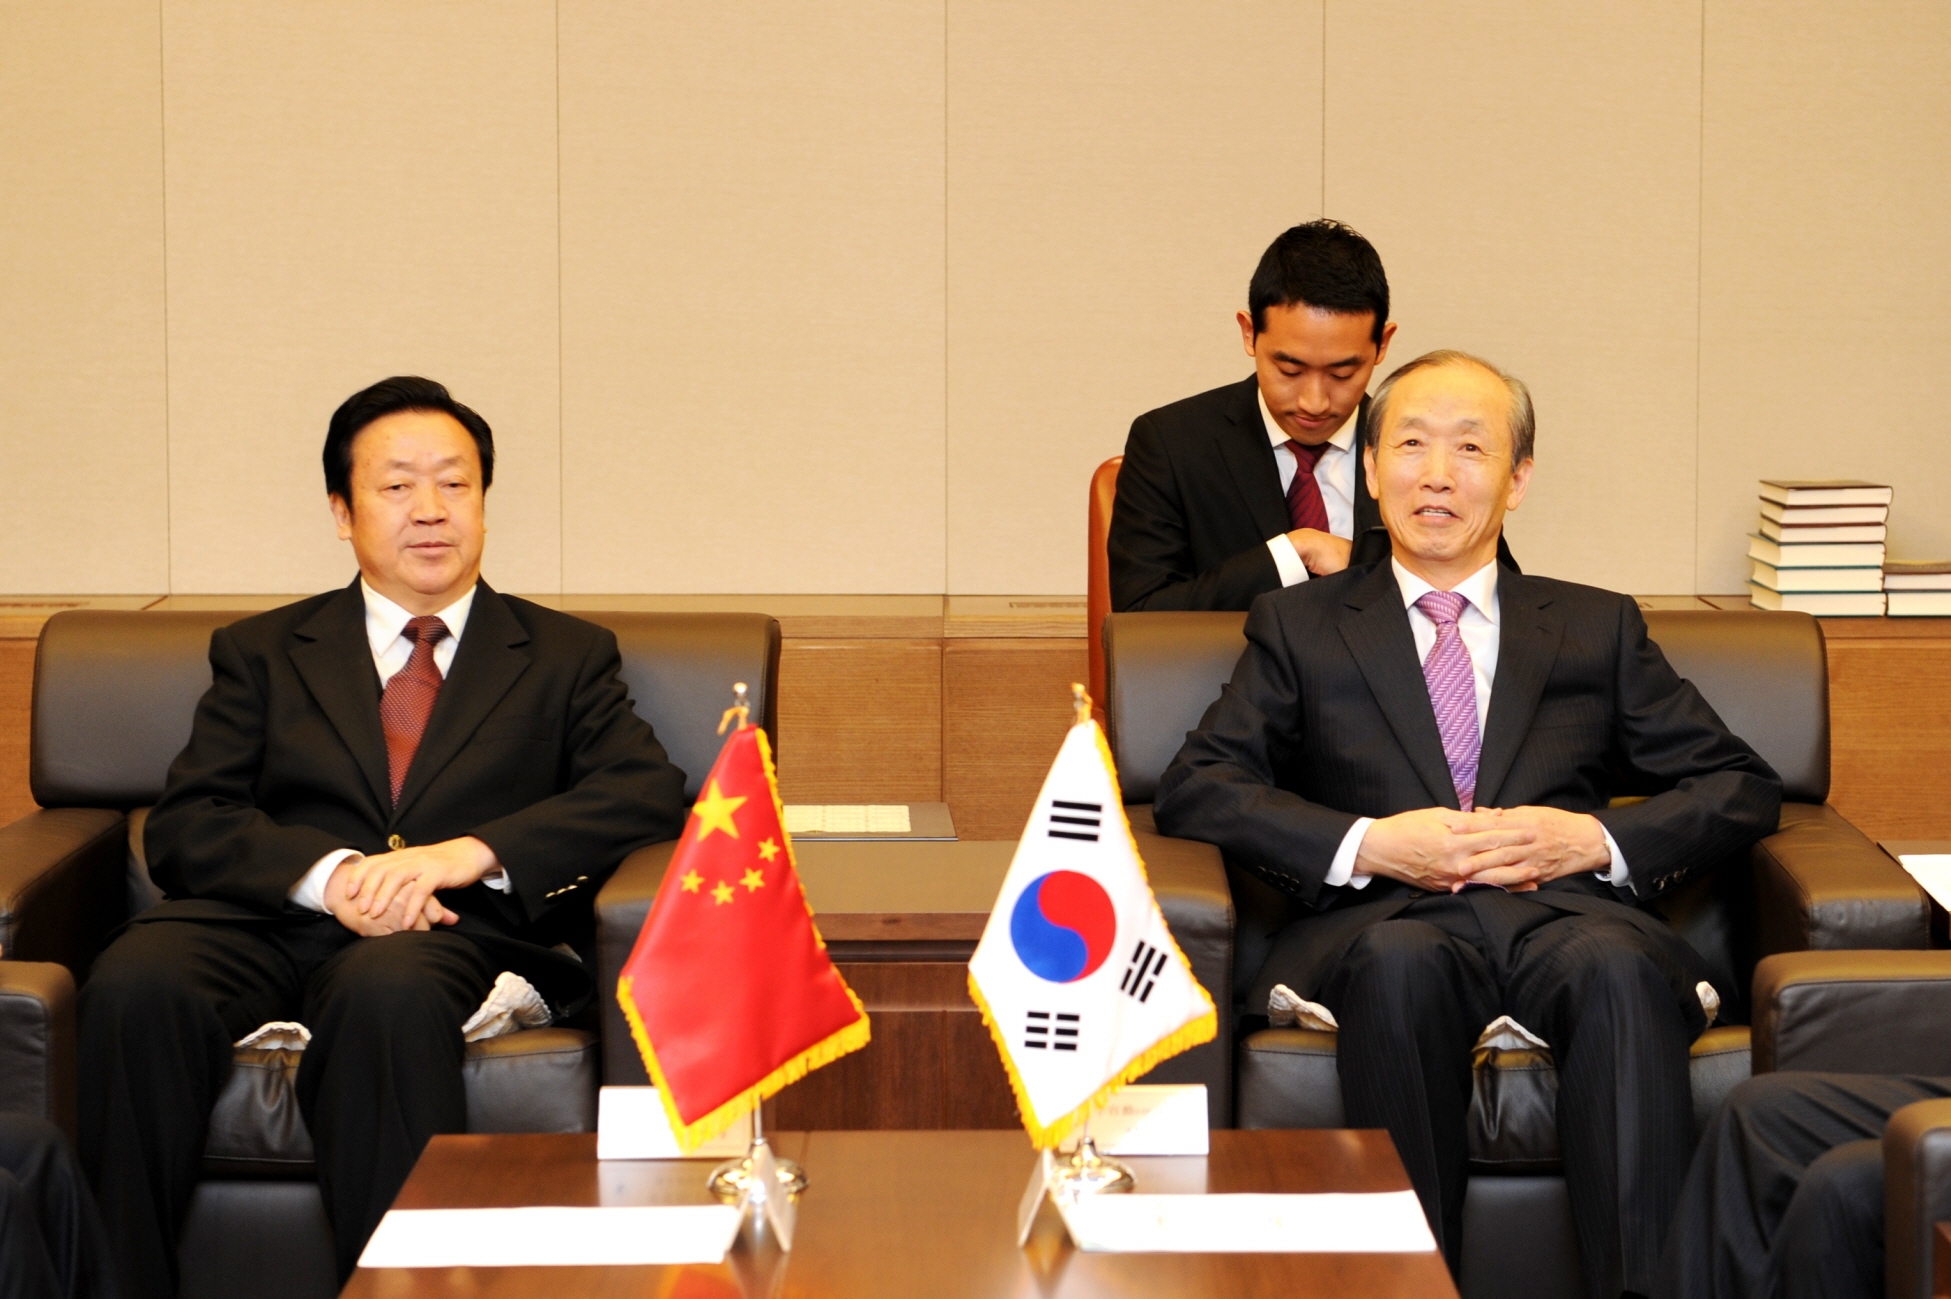 [11_07_10]Official Visit of the President & Chief Justice of the Supreme People's Court of China to the Supreme Court of Korea